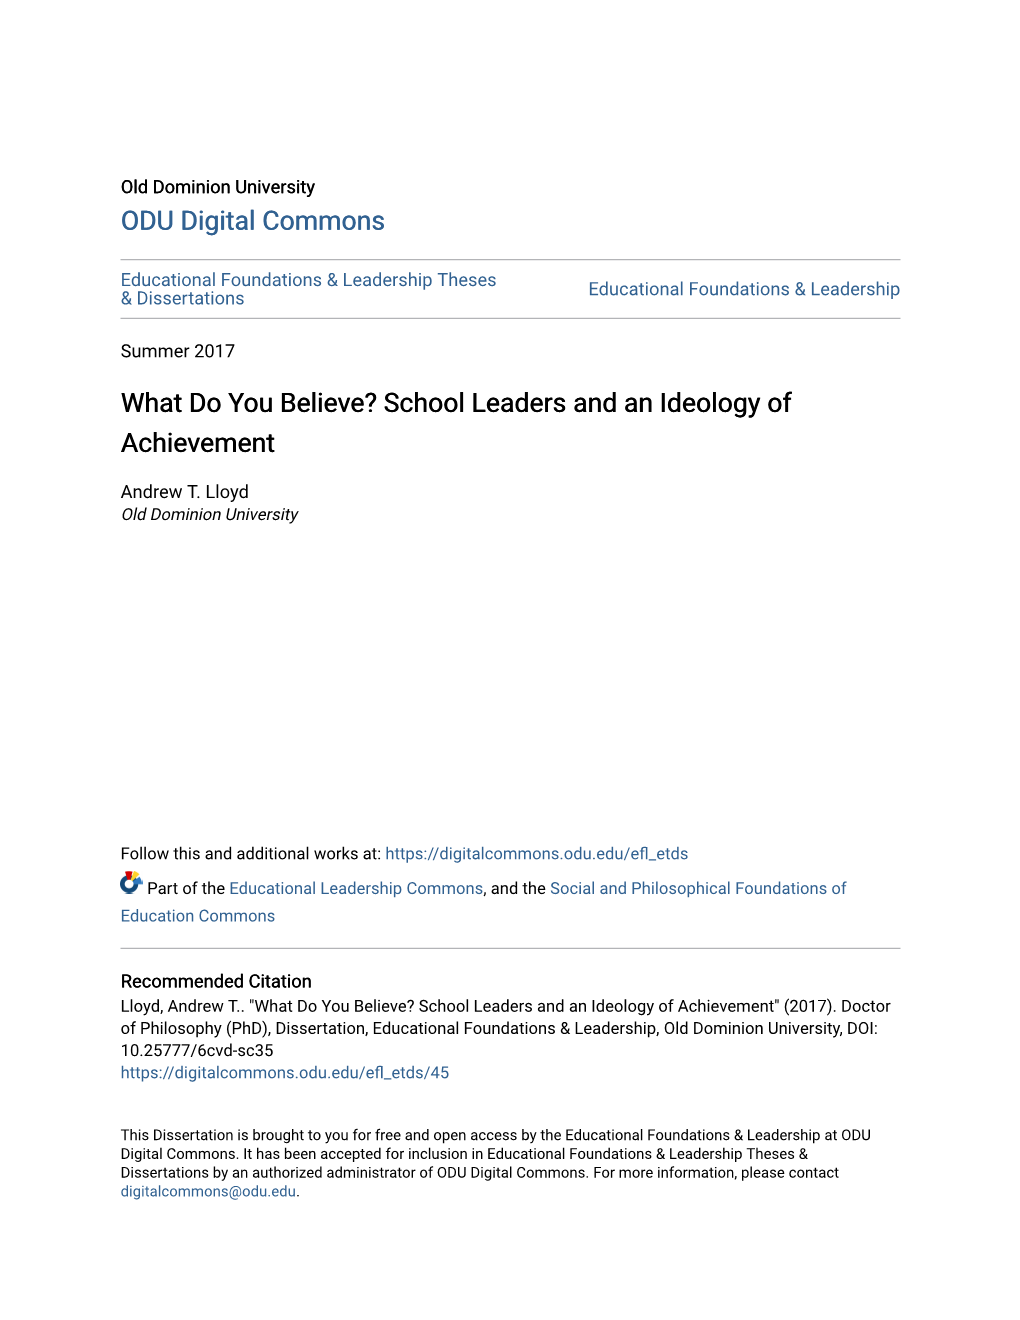 School Leaders and an Ideology of Achievement